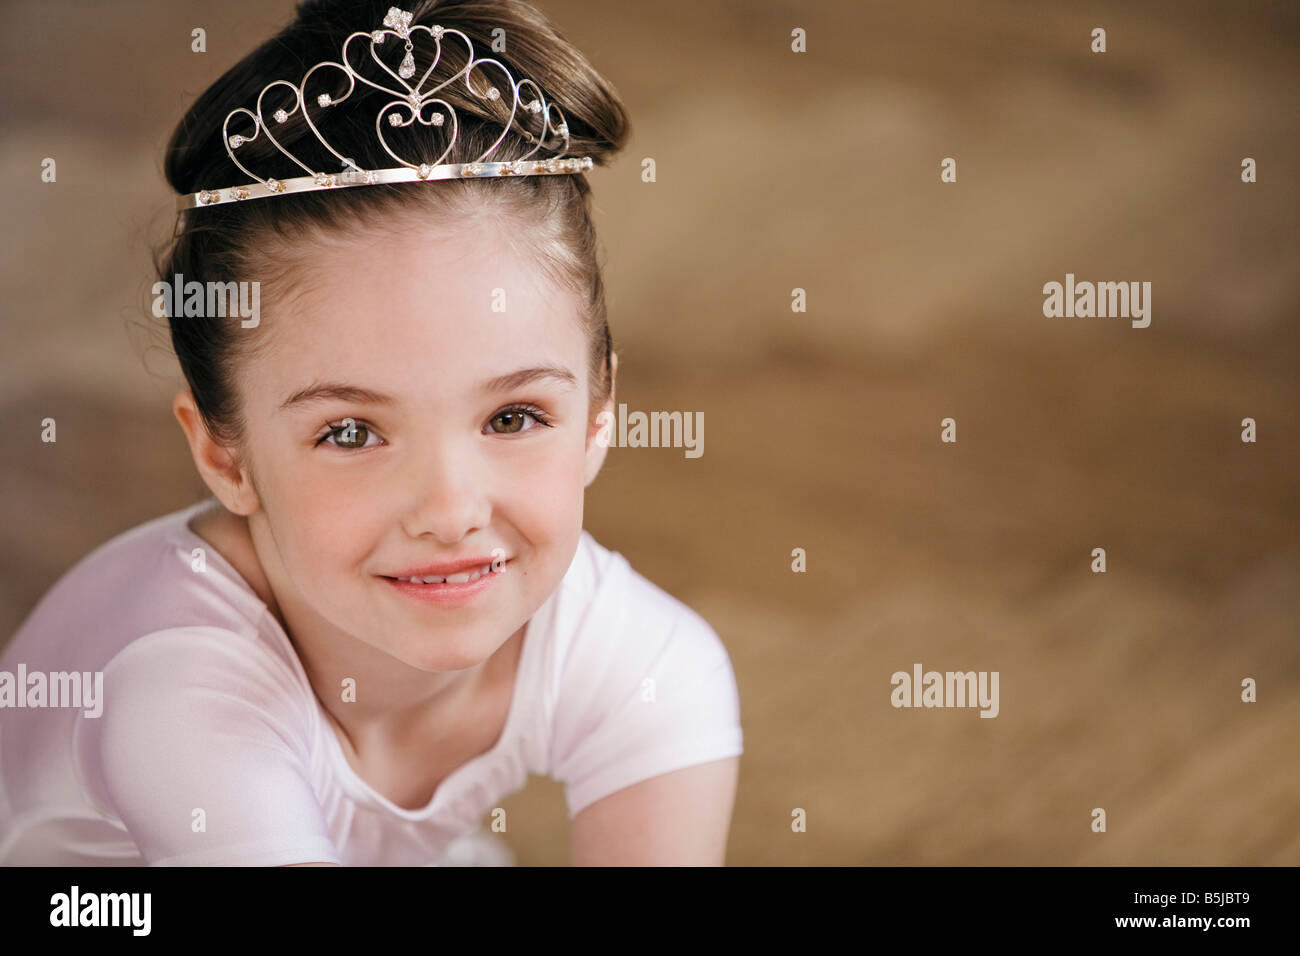 portrait of young ballet dancer wearing little crown Stock Photo